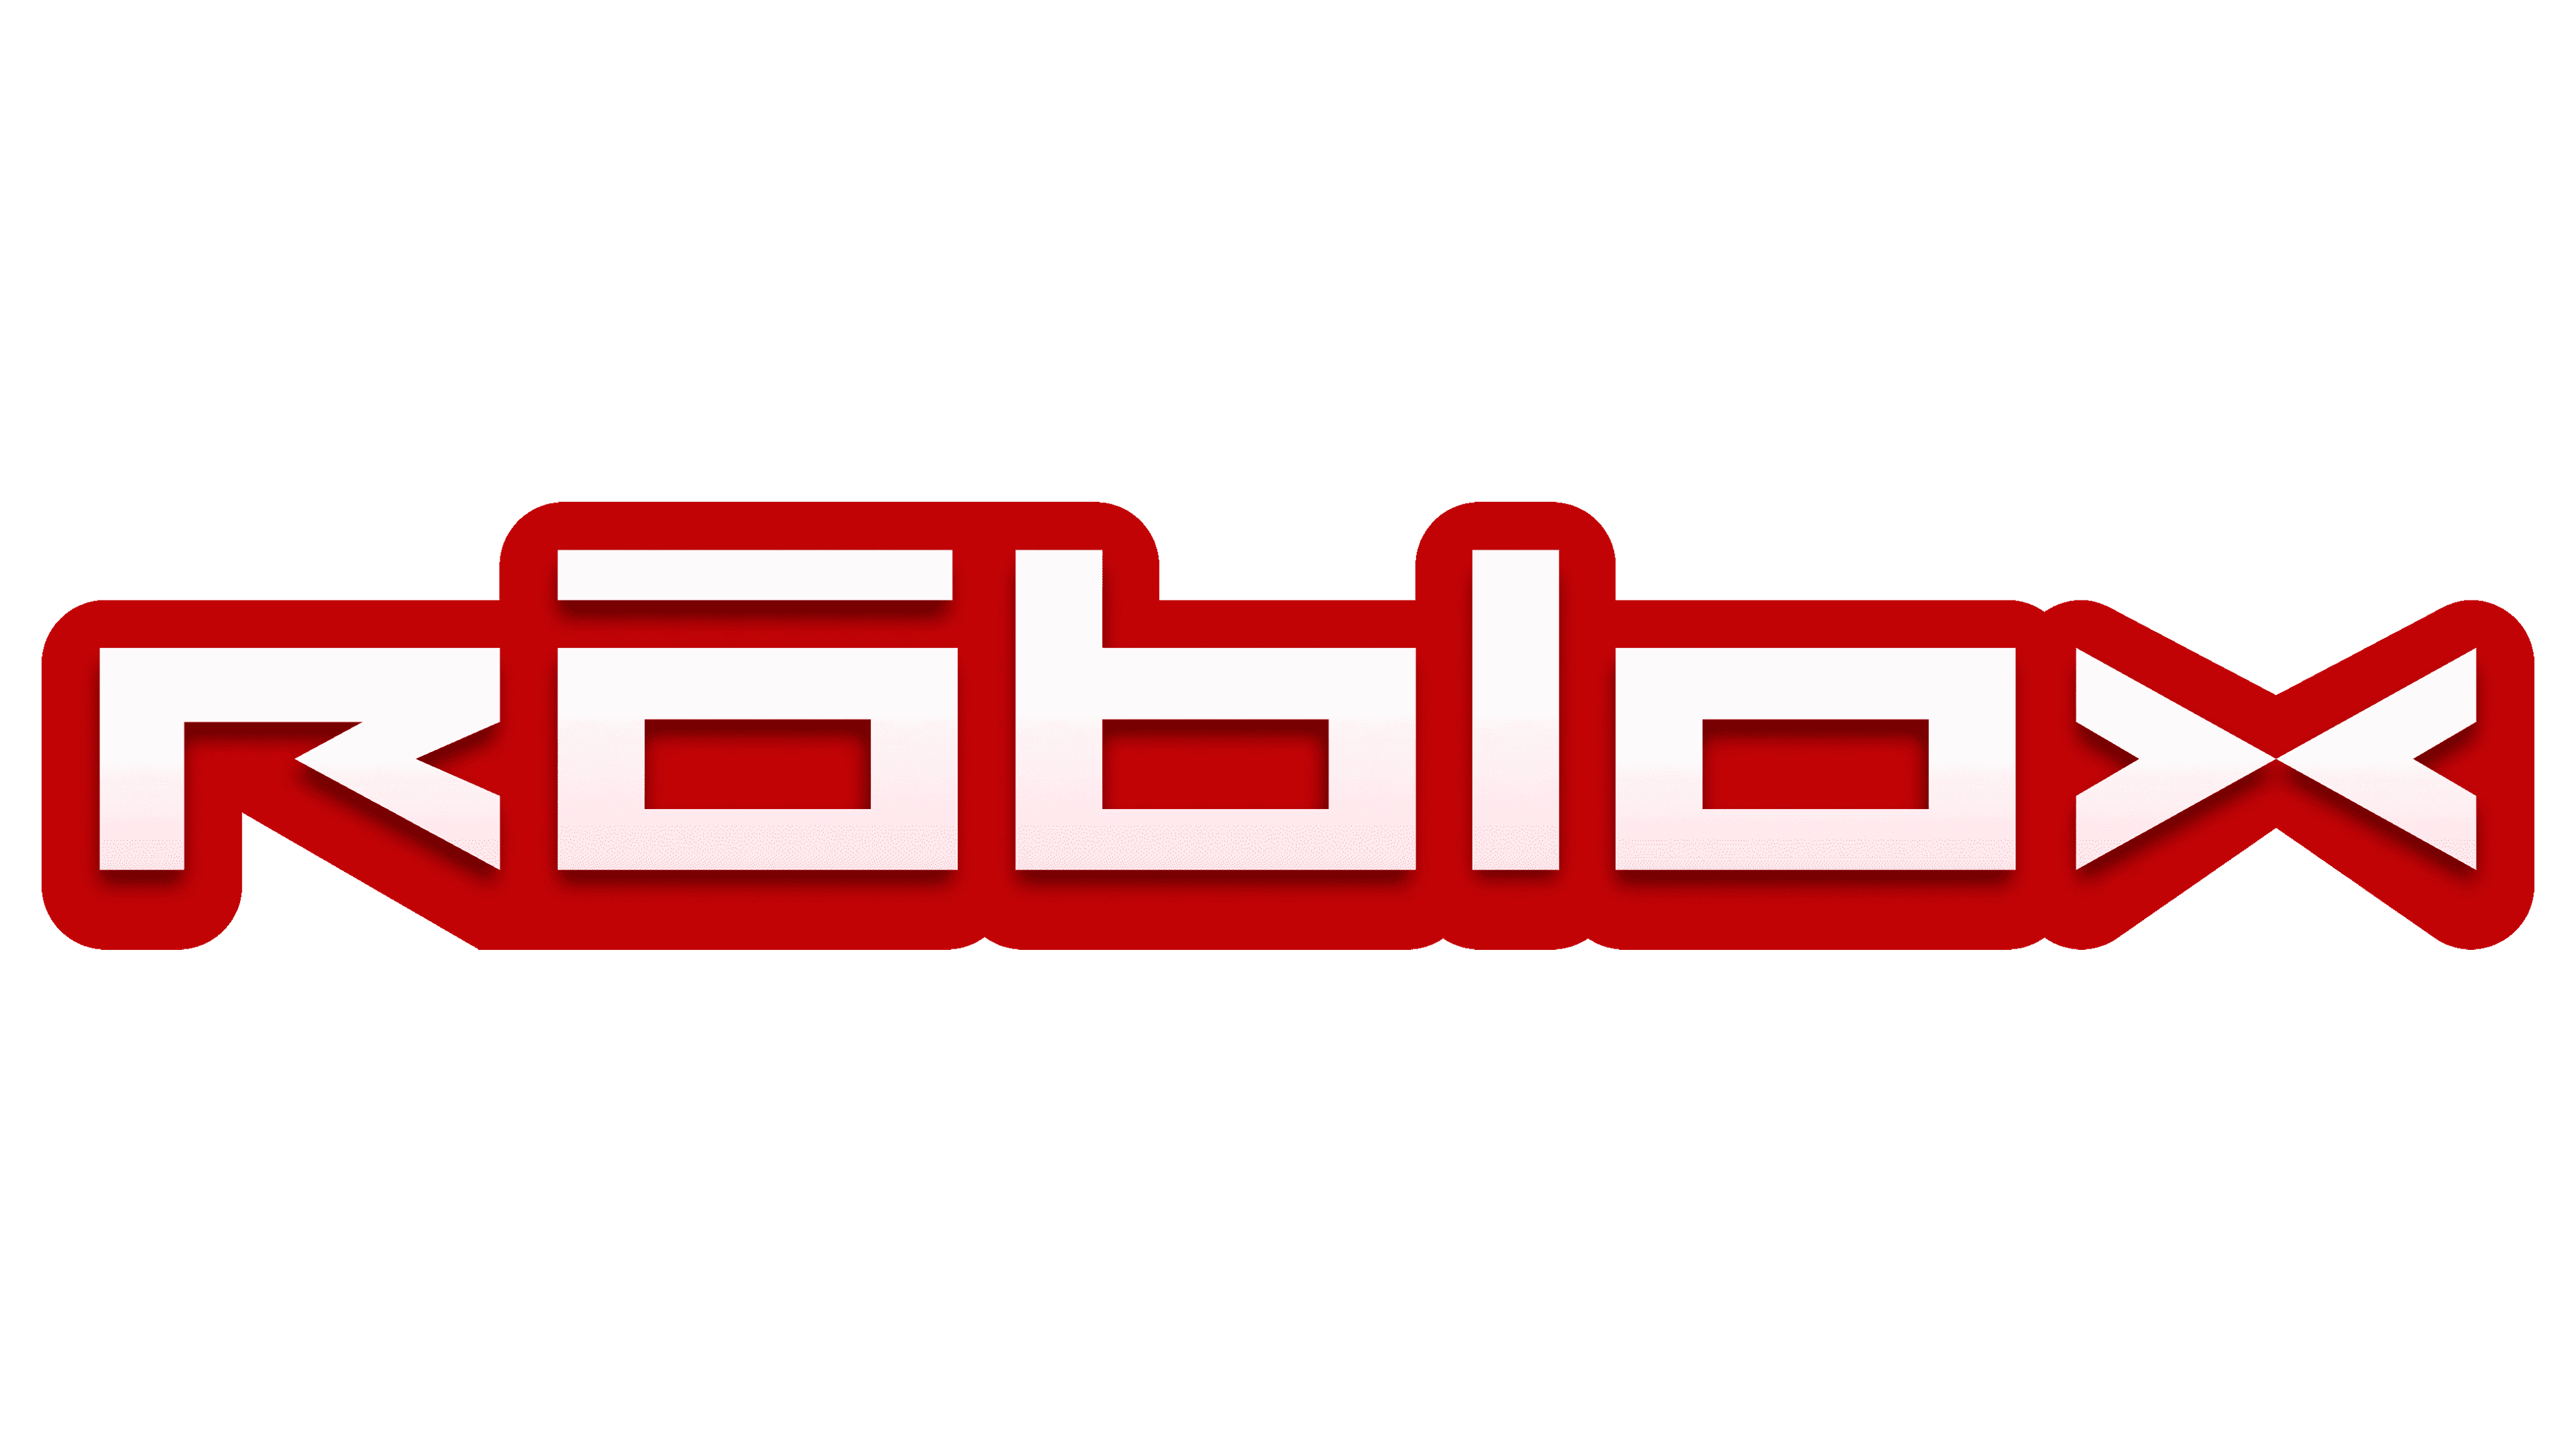 redesigns of the roblox logo based on all its previous ones